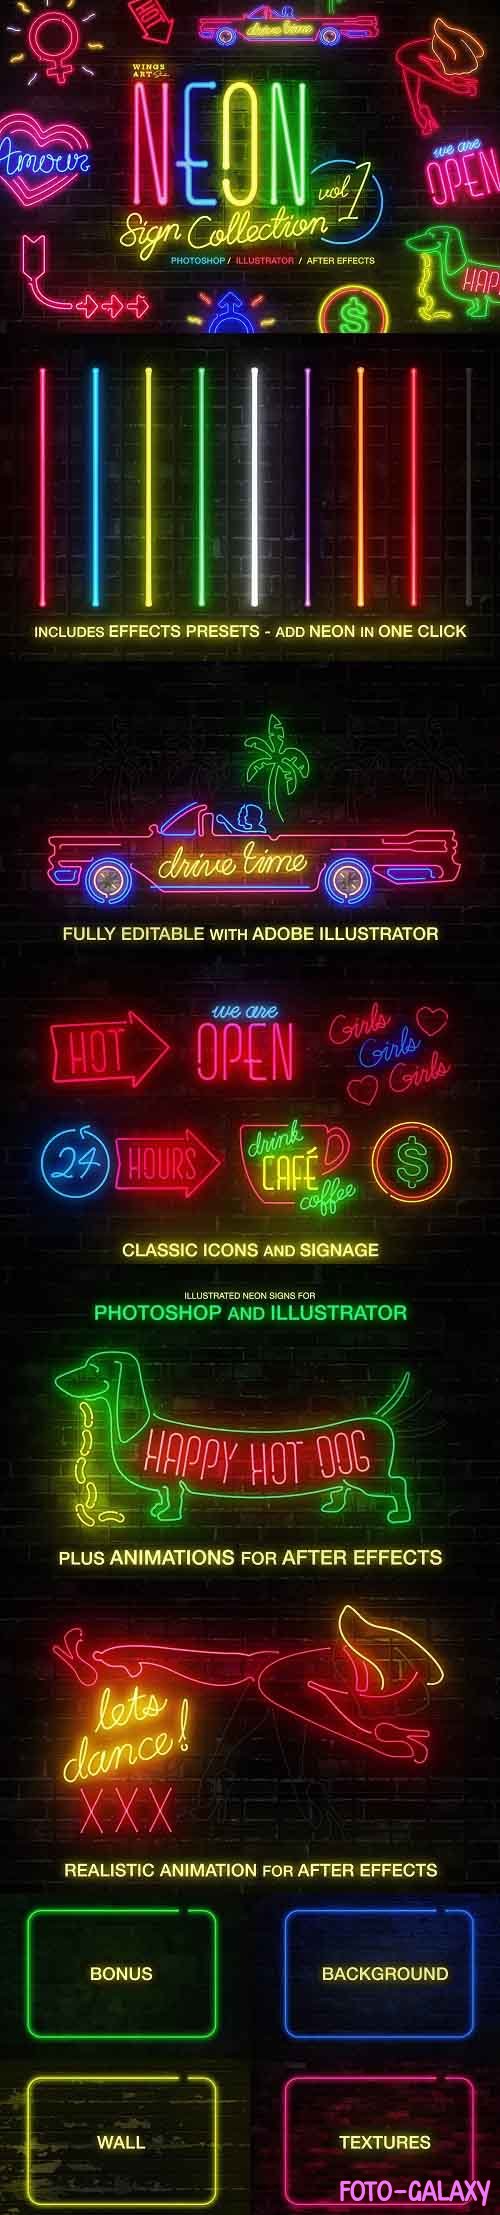 CreativeMarket - Neon Sign Collection: Volume One 4718662